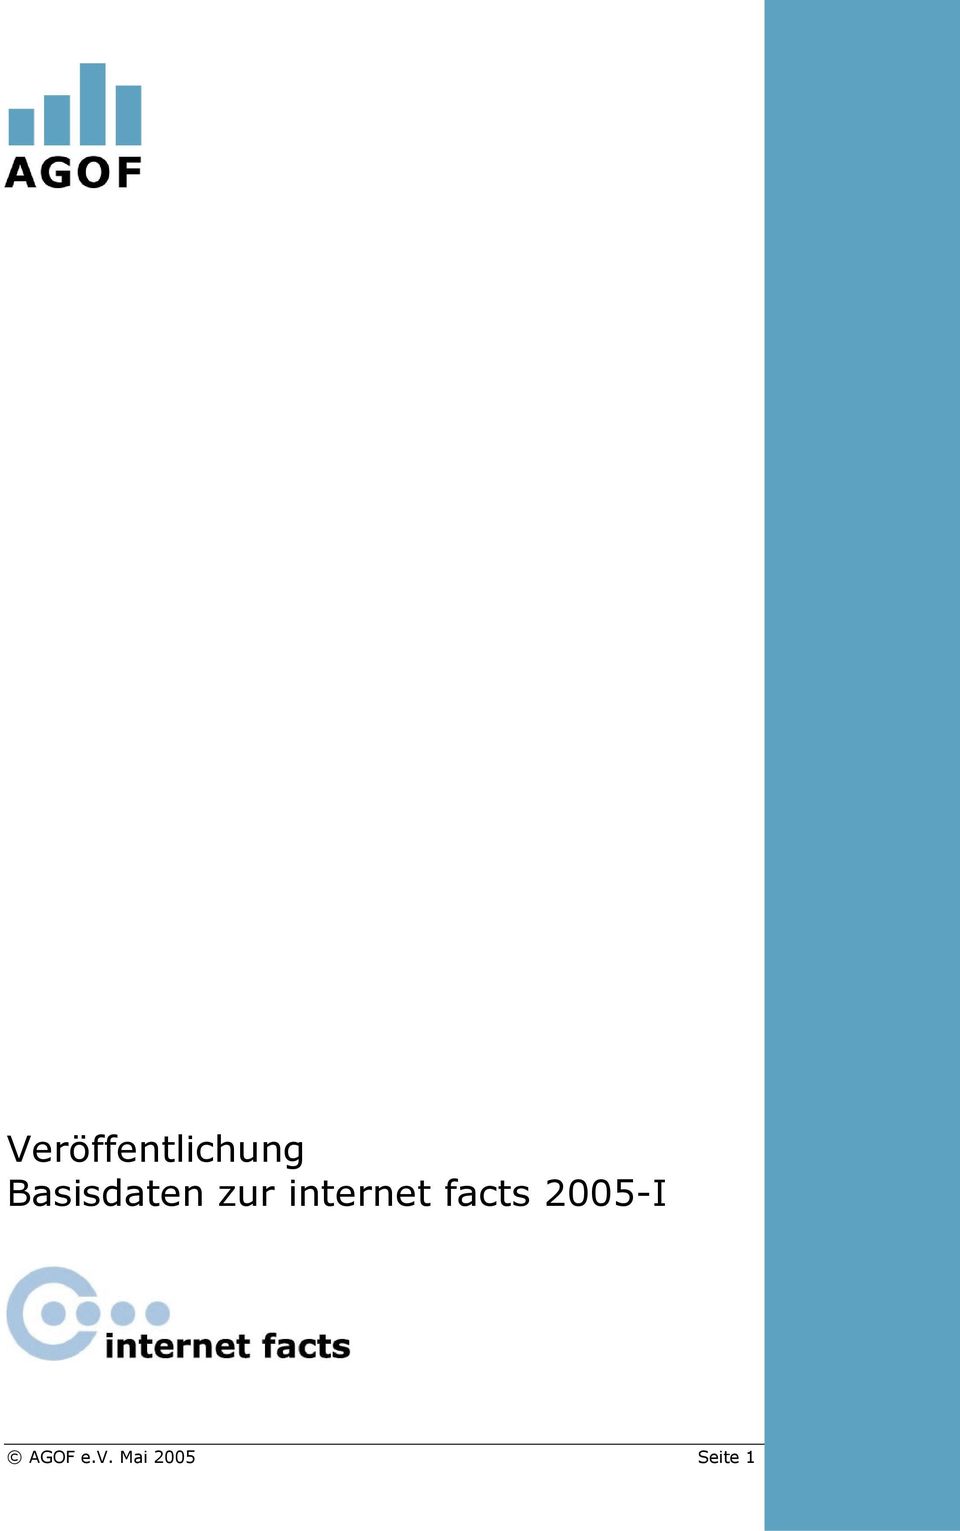 internet facts